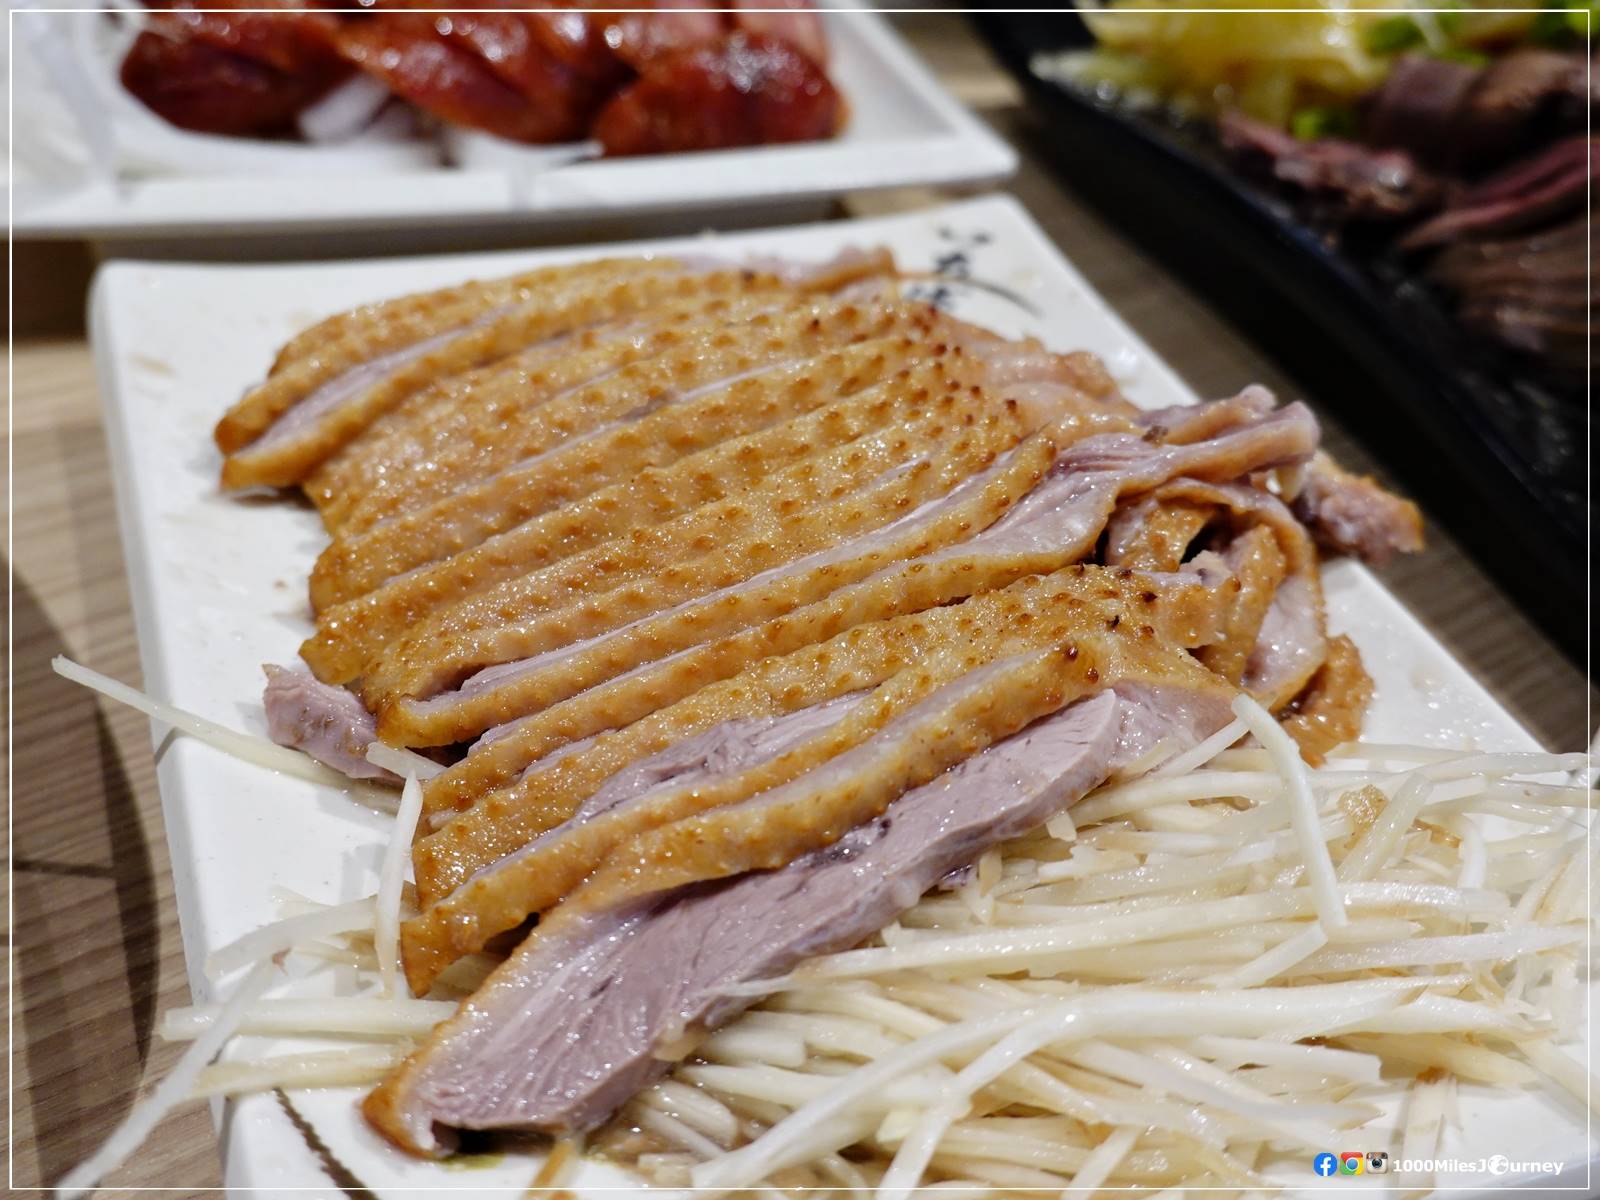 Smoked goose is A Cheng's signature dish